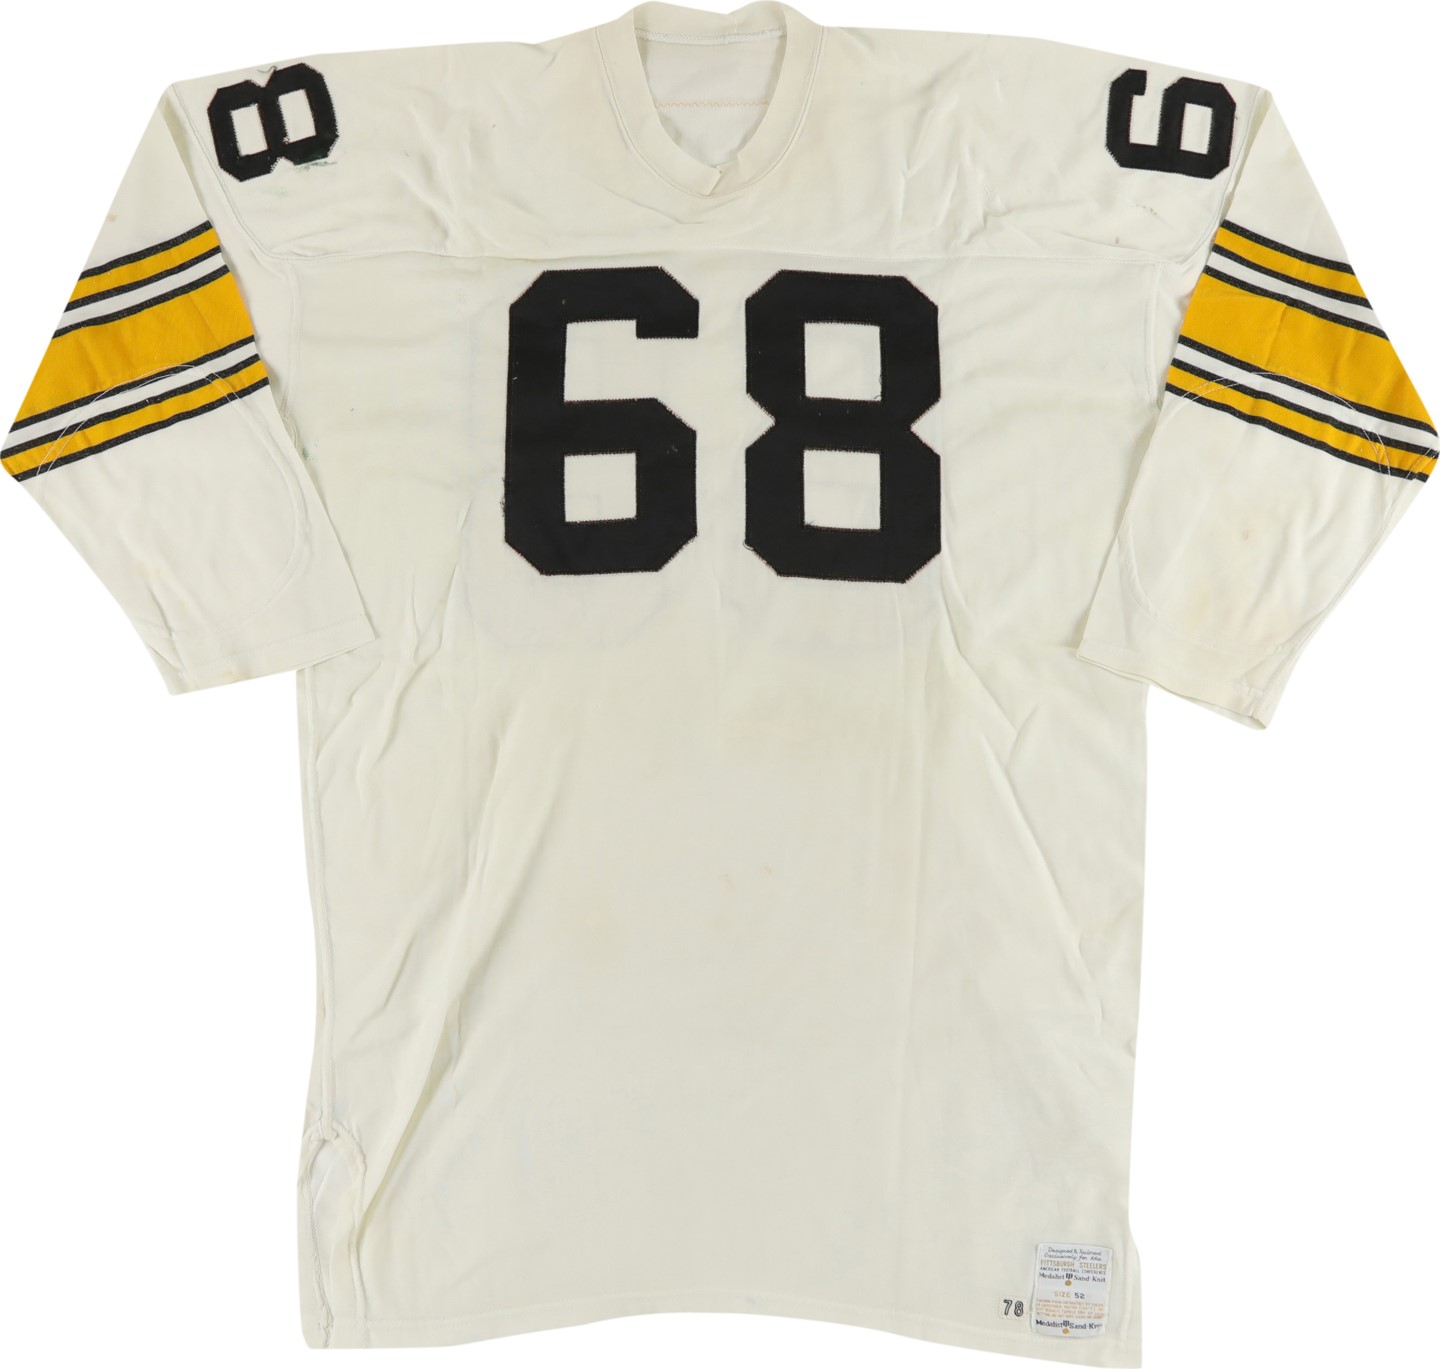 The Pittsburgh Steelers Game Worn Jersey Archive - 1978 L.C. Greenwood Pittsburgh Steelers Game Worn Jersey